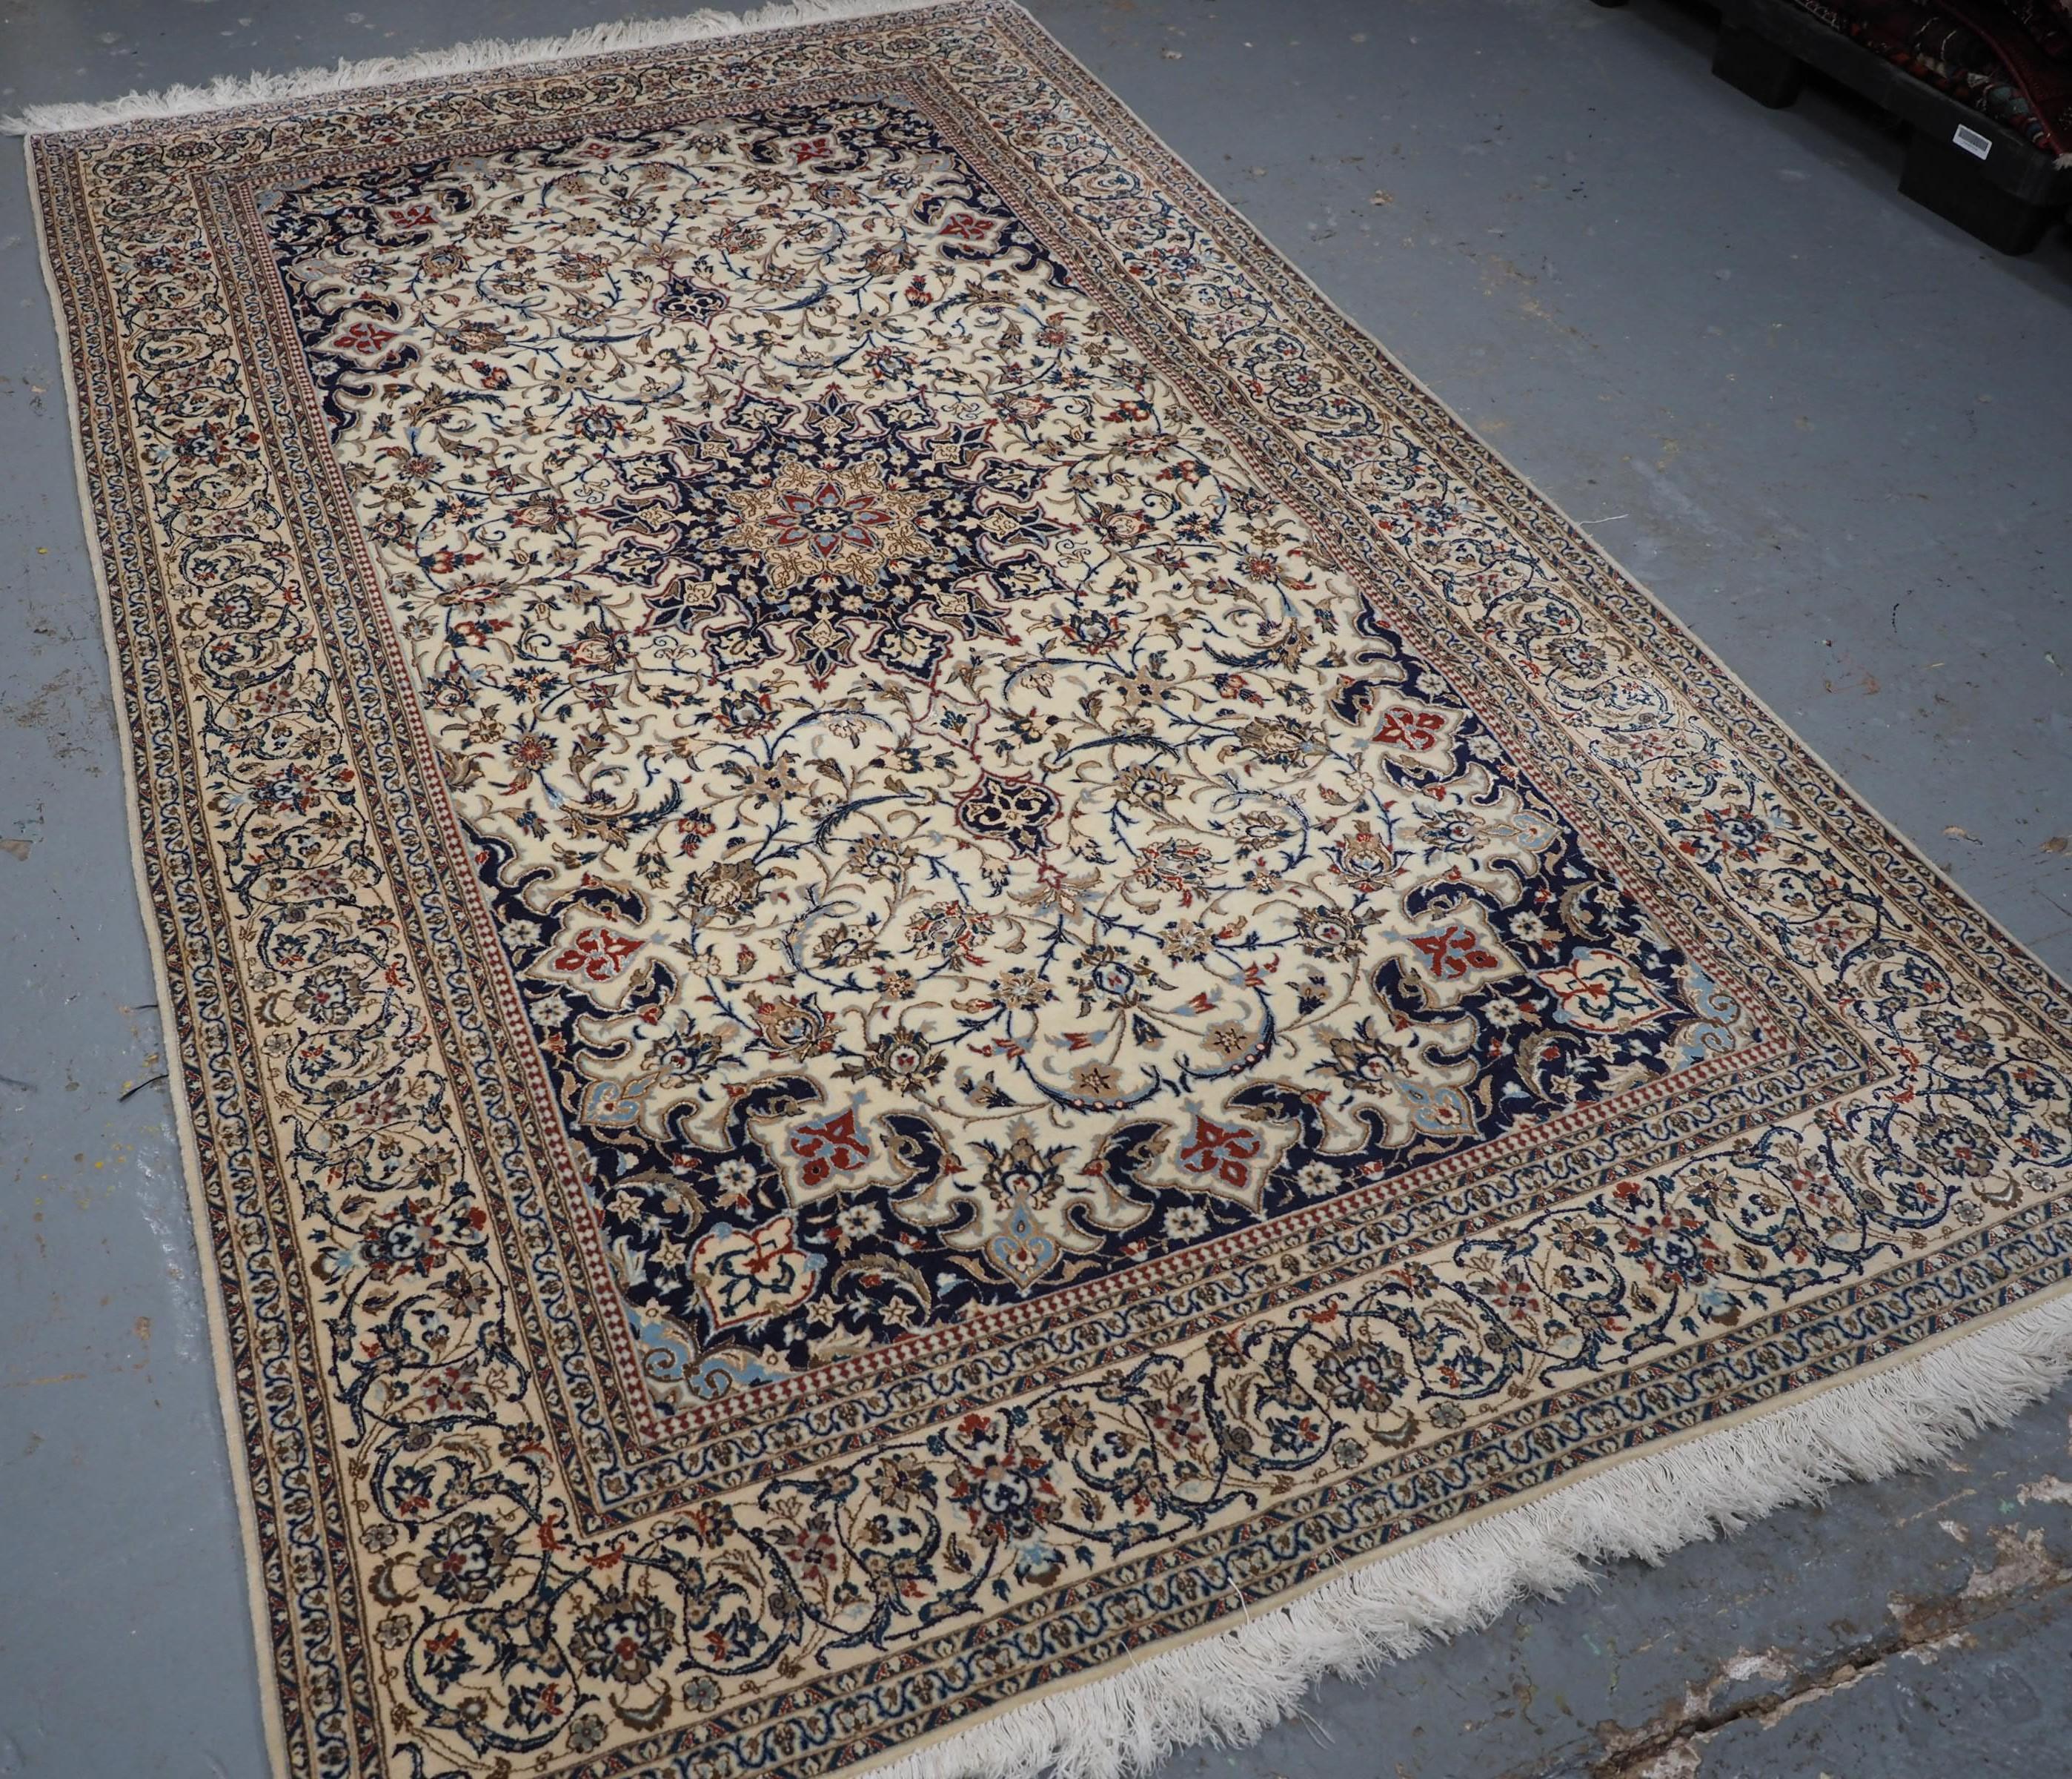 Size: 8ft 5in x 5ft 1in (256x 155cm).

Old Persian Nain carpet, lambs wool and silk on a fine cotton foundation.

Circa 1960.

The carpet is of fine weave with tight fine pile of lambs wool, the carpet has a velvet like feel with highlights in silk.